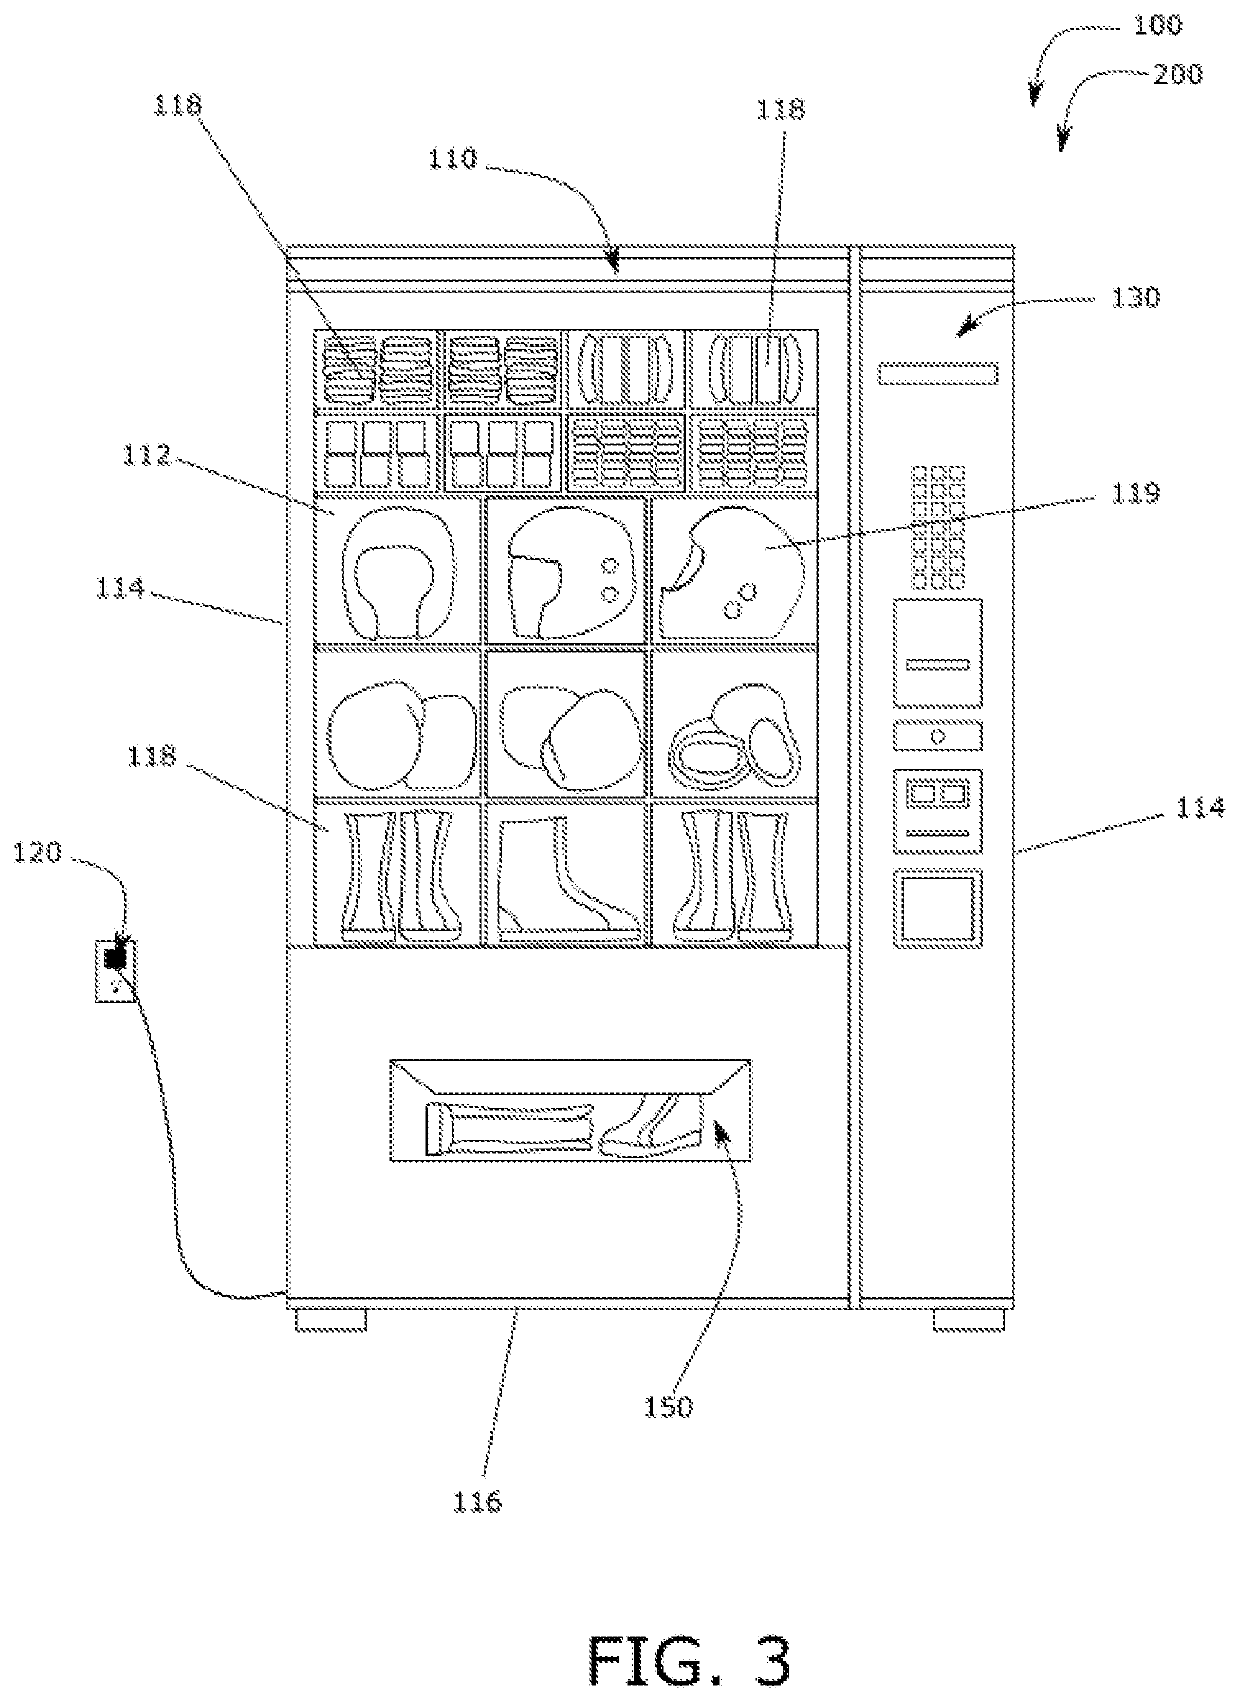 Wrapping and dispensing apparatus